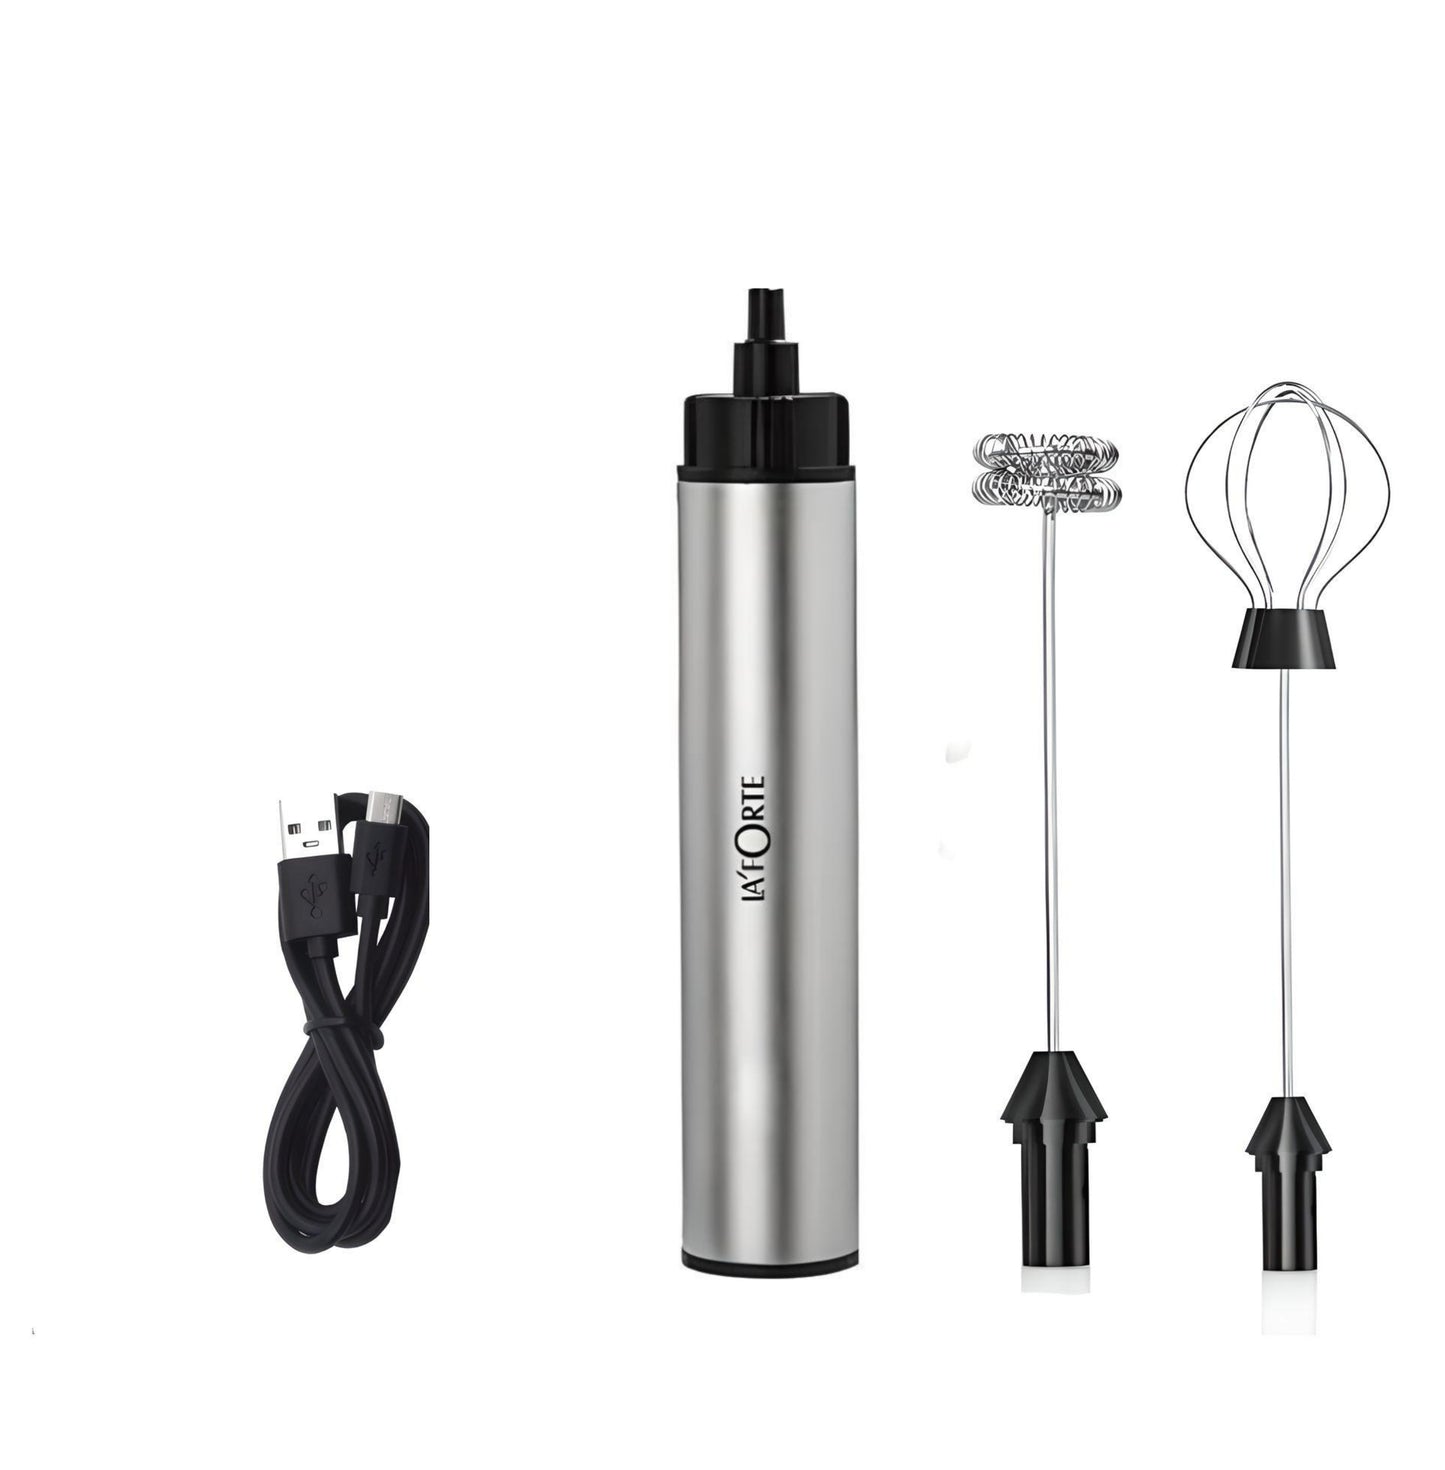 LA' FORTE Rechargeable Mini Blender- Milk Frother, Whisker, Coffee Beater